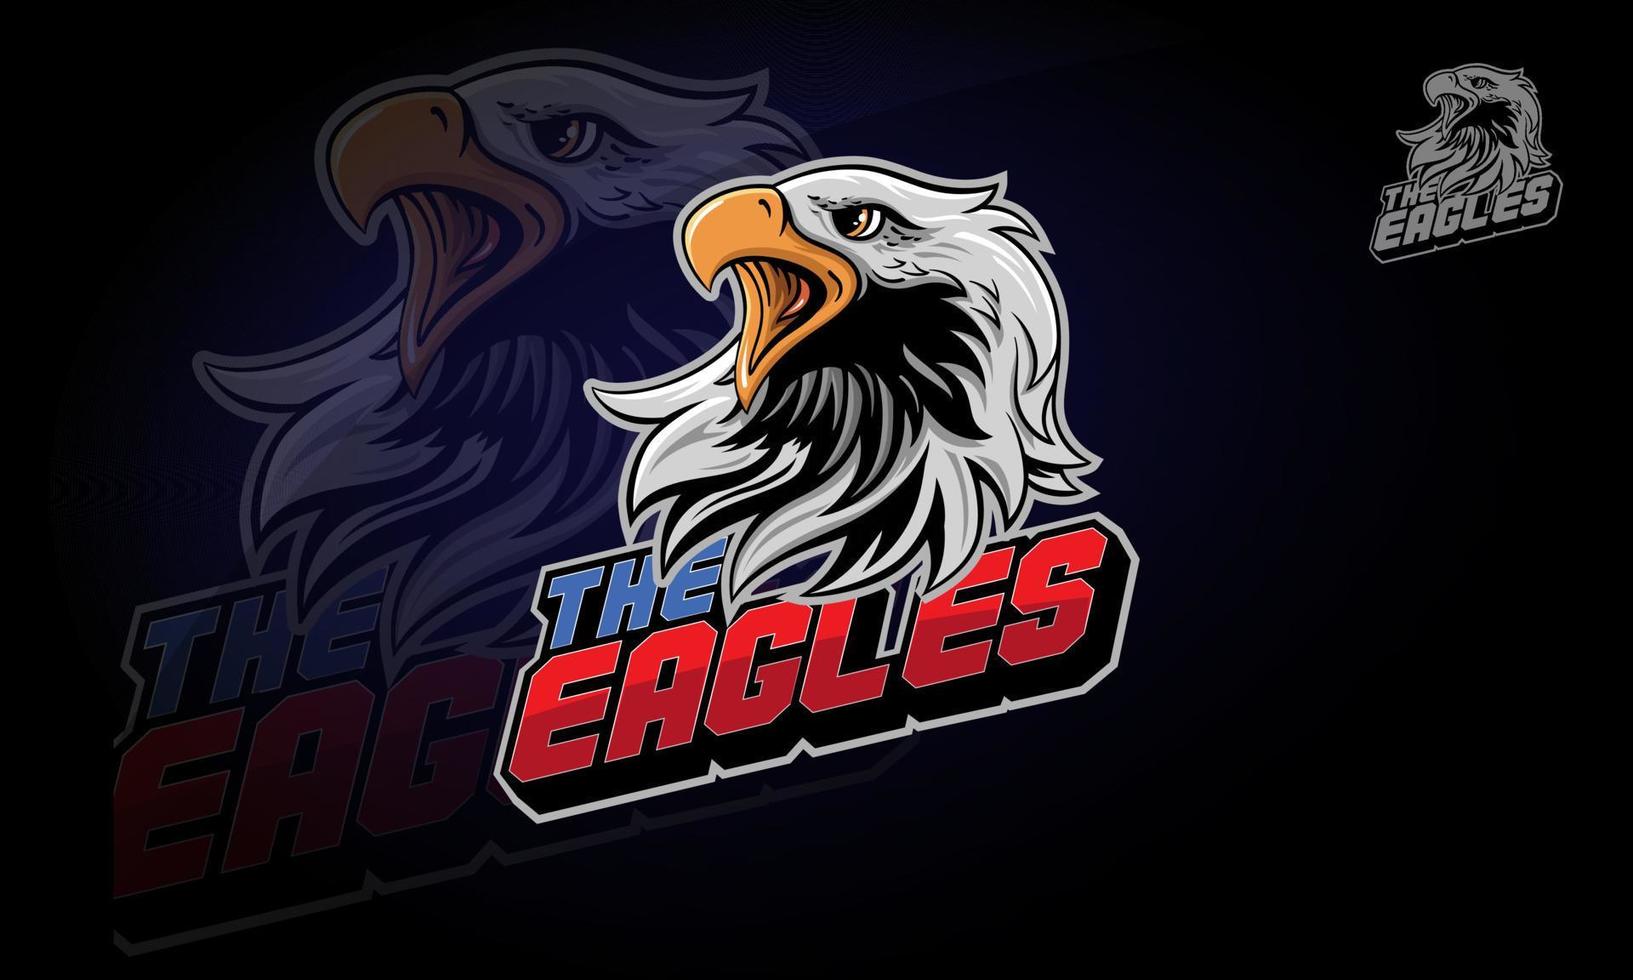 The Eagle Vector Logo Illustration.  Very sporty and easy to use. Eagle logo, suitable for sport business, racing, automotive, for all law firm, political organization, security, etc.